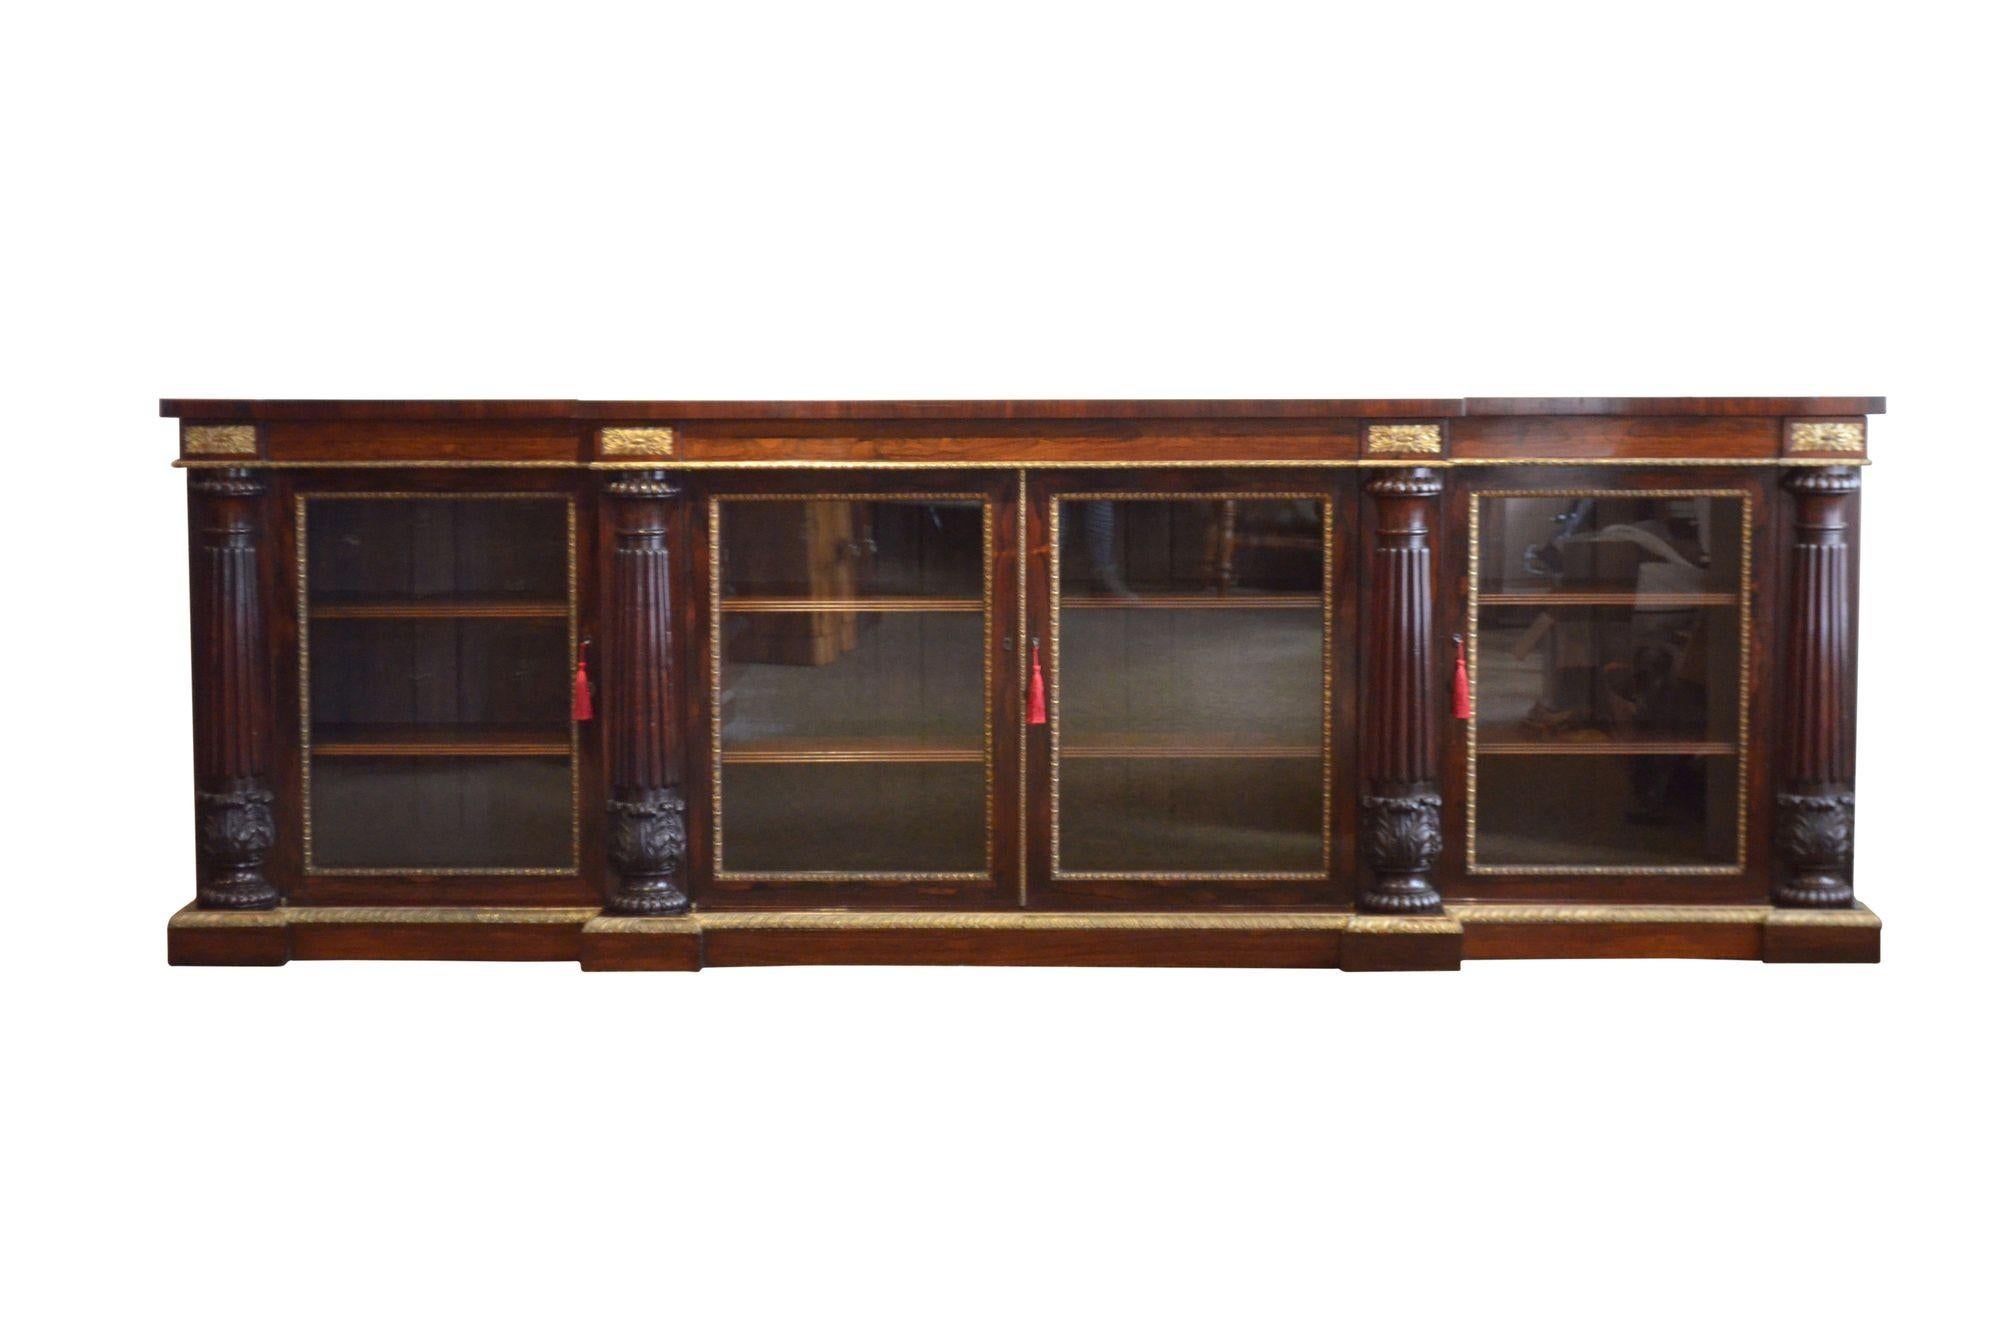 Sn5523 An exhibition quality George IV break fronted sideboard, having oversailing top with stunning figured grain above a shallow frieze with original ormolu pateraes and pair of central glazed doors enclosing simulated rosewood interior with four